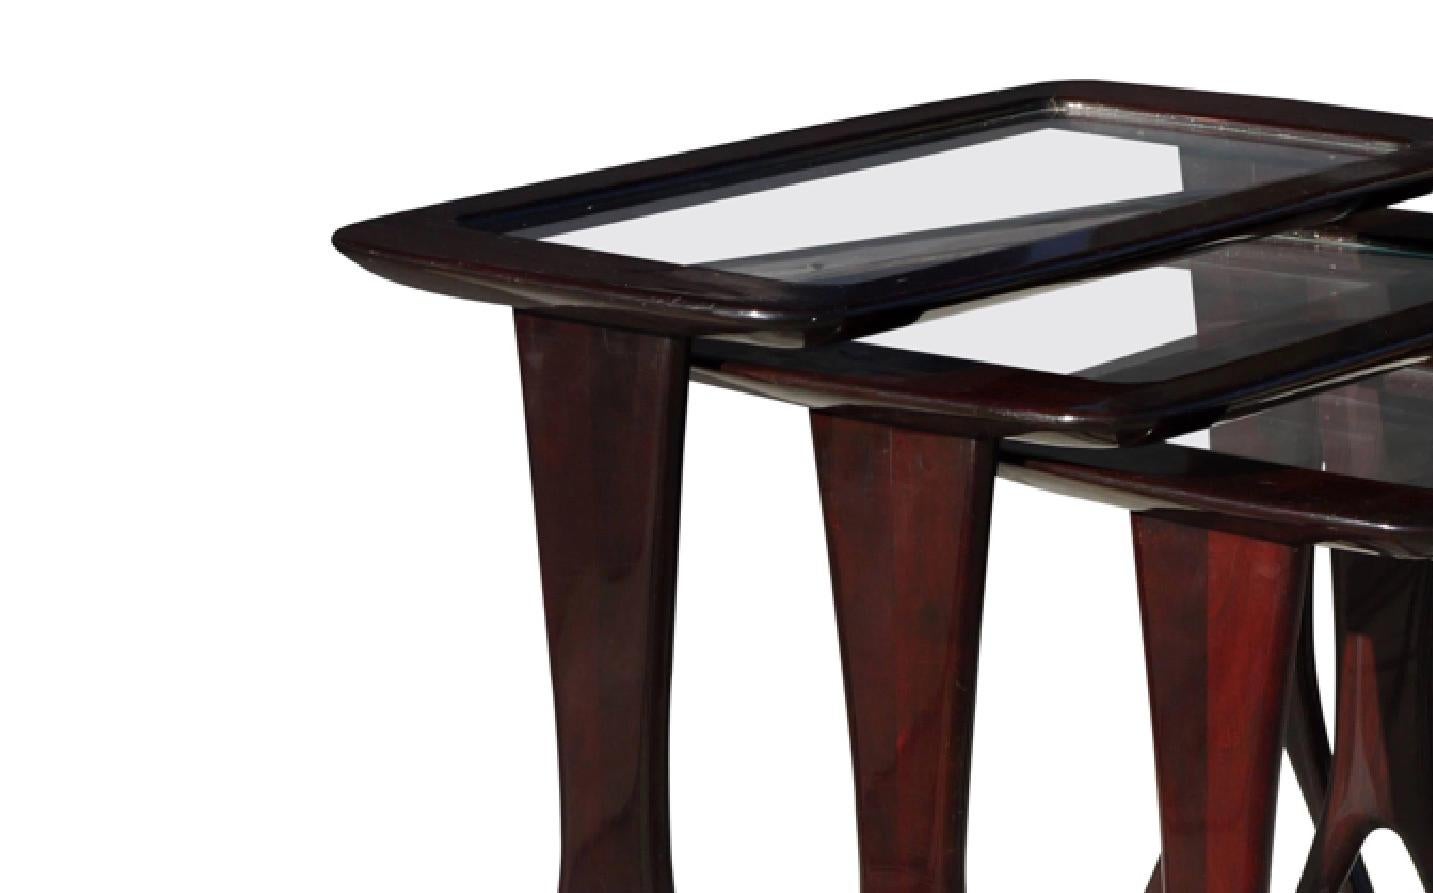 Set of three nesting tables with tapered legs. Wood and glass. 52 X 62 X 35cm. Bibliography. 